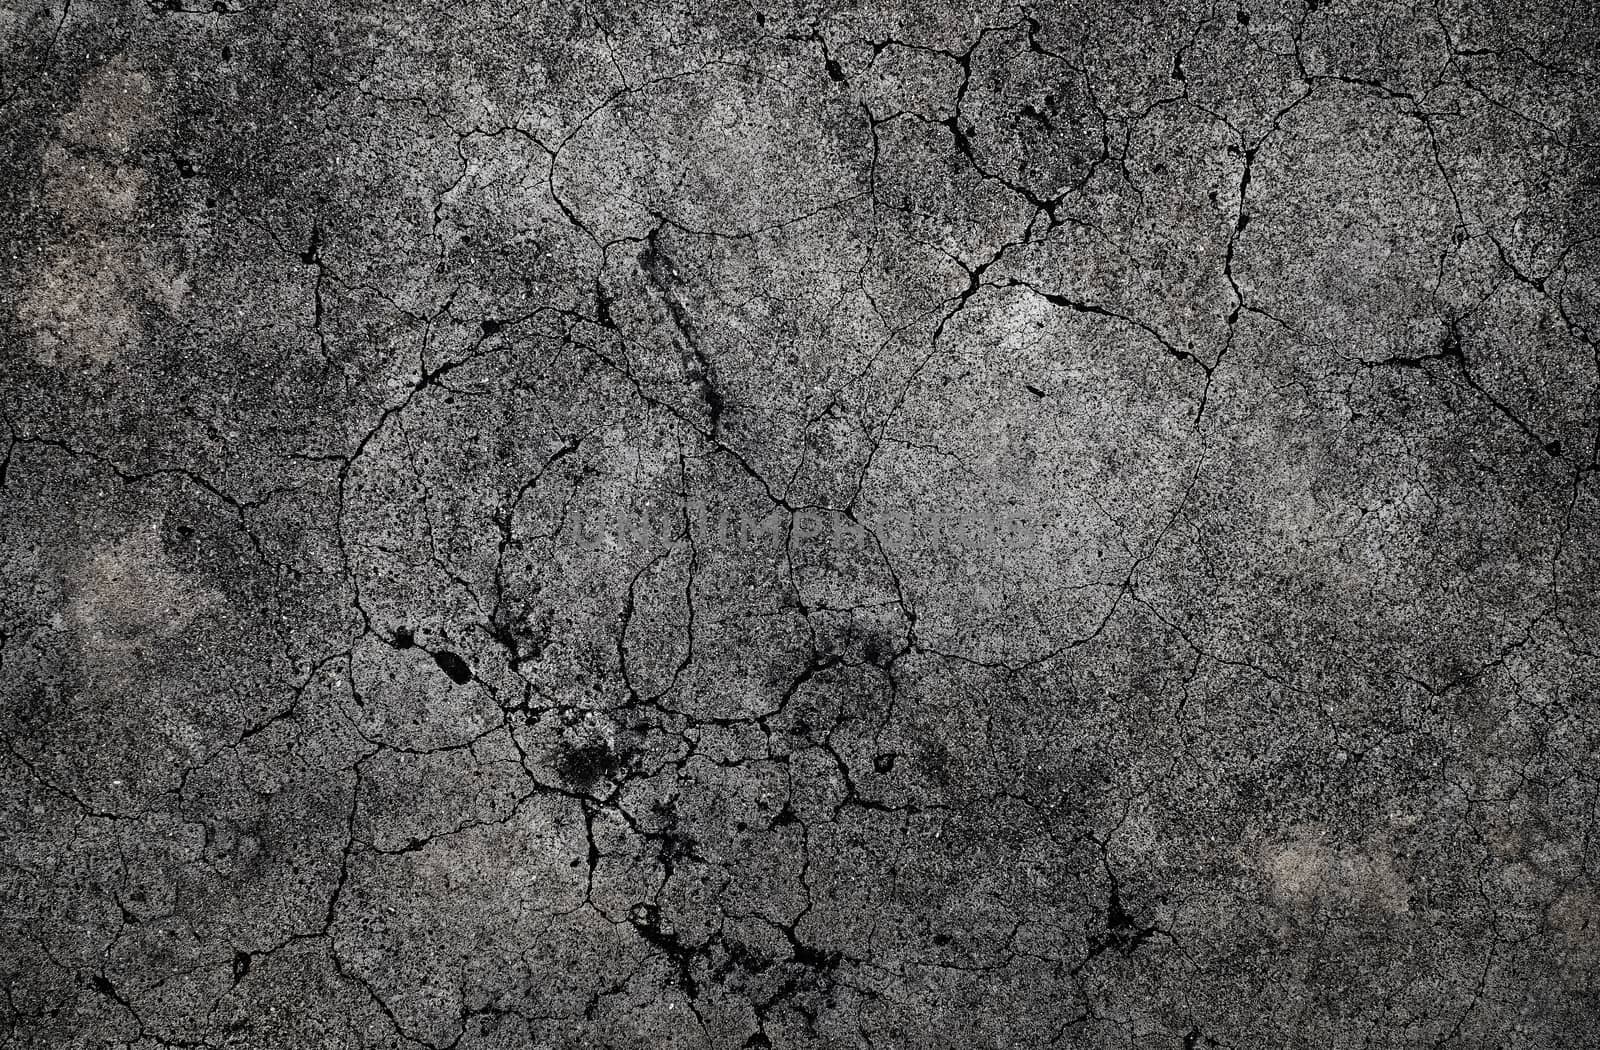 Cracked concrete texture background by Myimagine